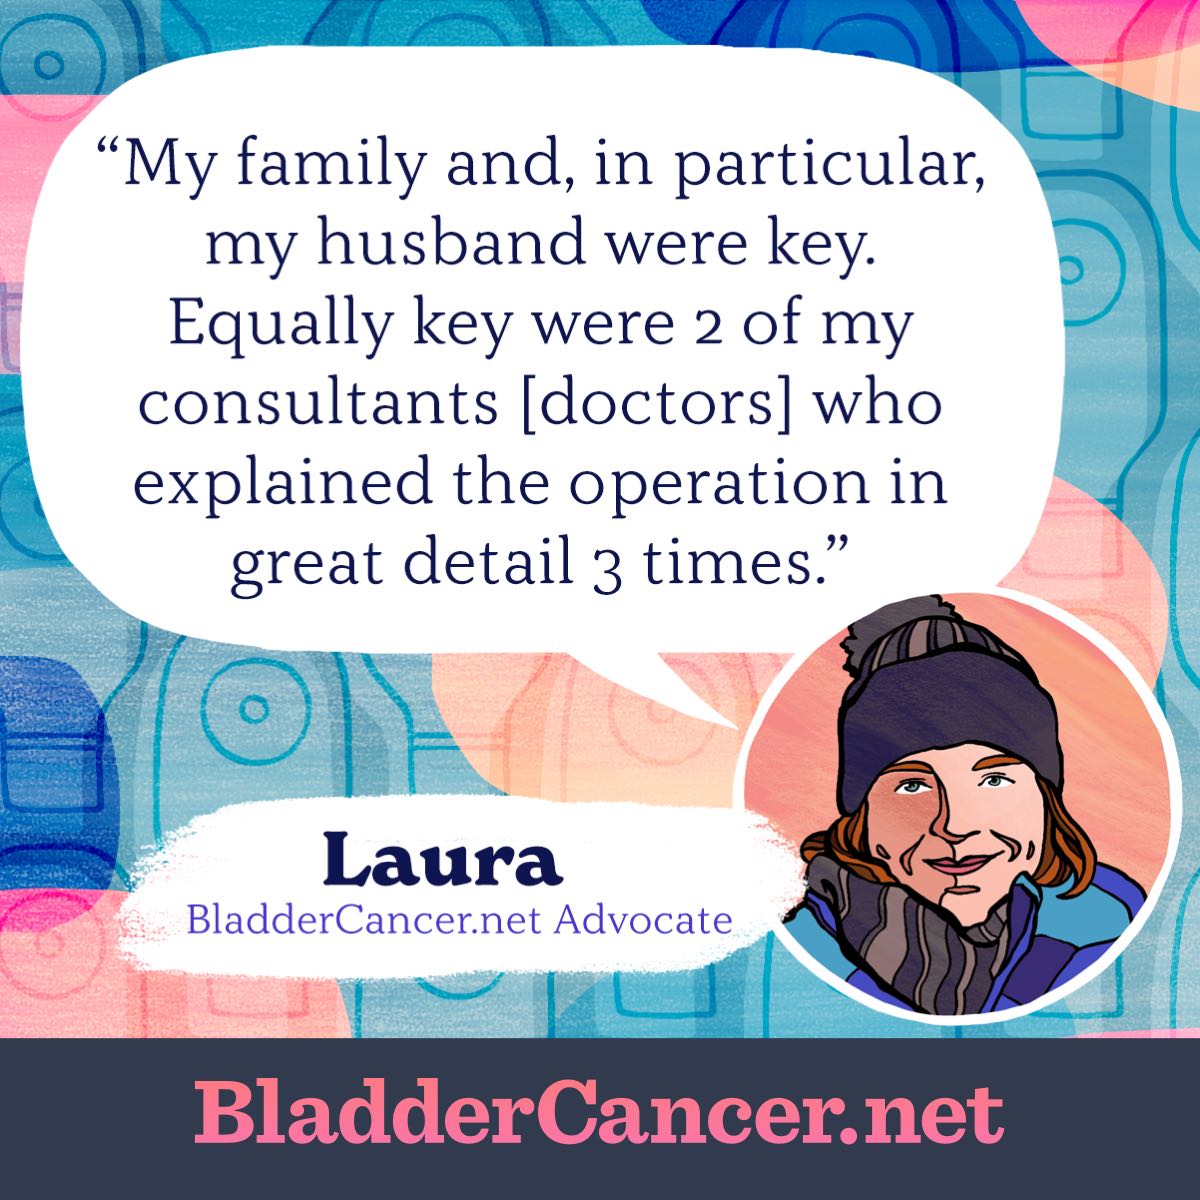 My family and, in particular, my husband were key. Equally key were 2 of my consultants [doctors] who explained the operation in great detail 3 times. -Laura, BladderCancer.net Advocate